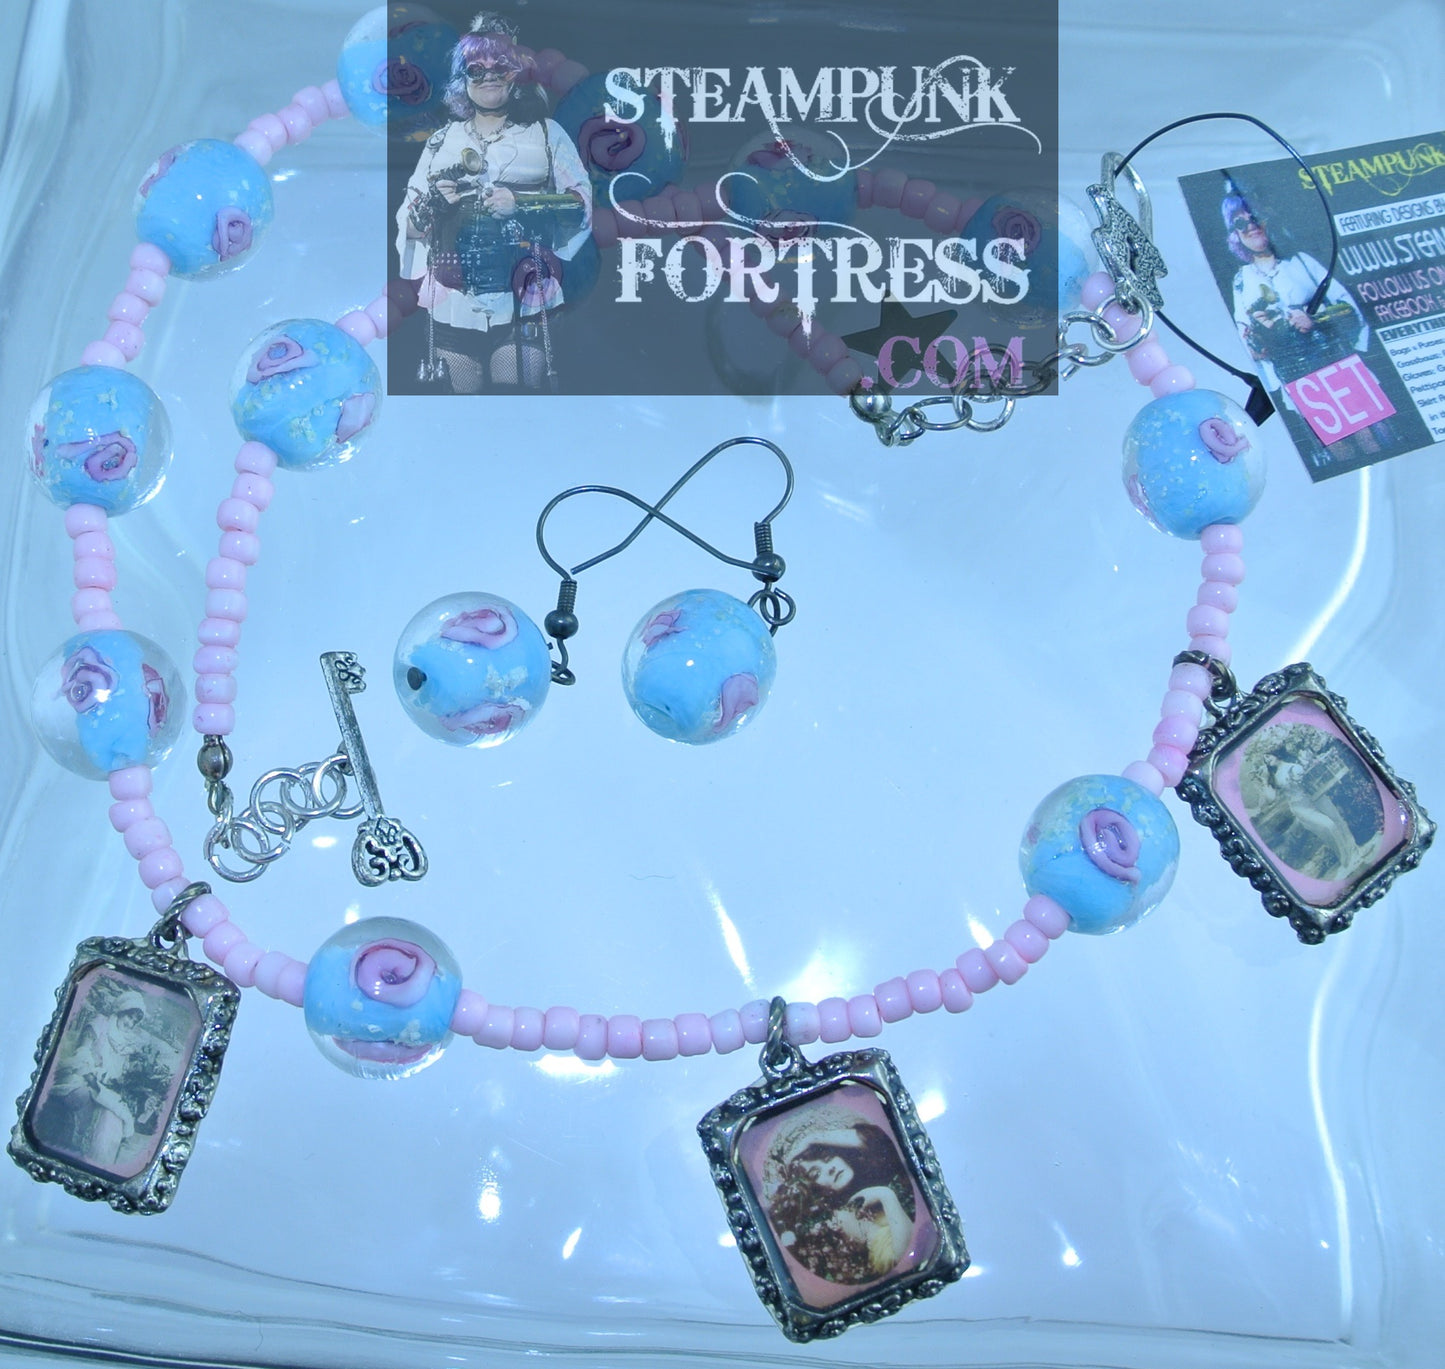 VINTAGE LADIES 3 PINK FRAMES GLOW IN THE DARK BLUE PINK BEADS NECKLACE SET AVAILABLE STARR WILDE STEAMPUNK FORTRESS